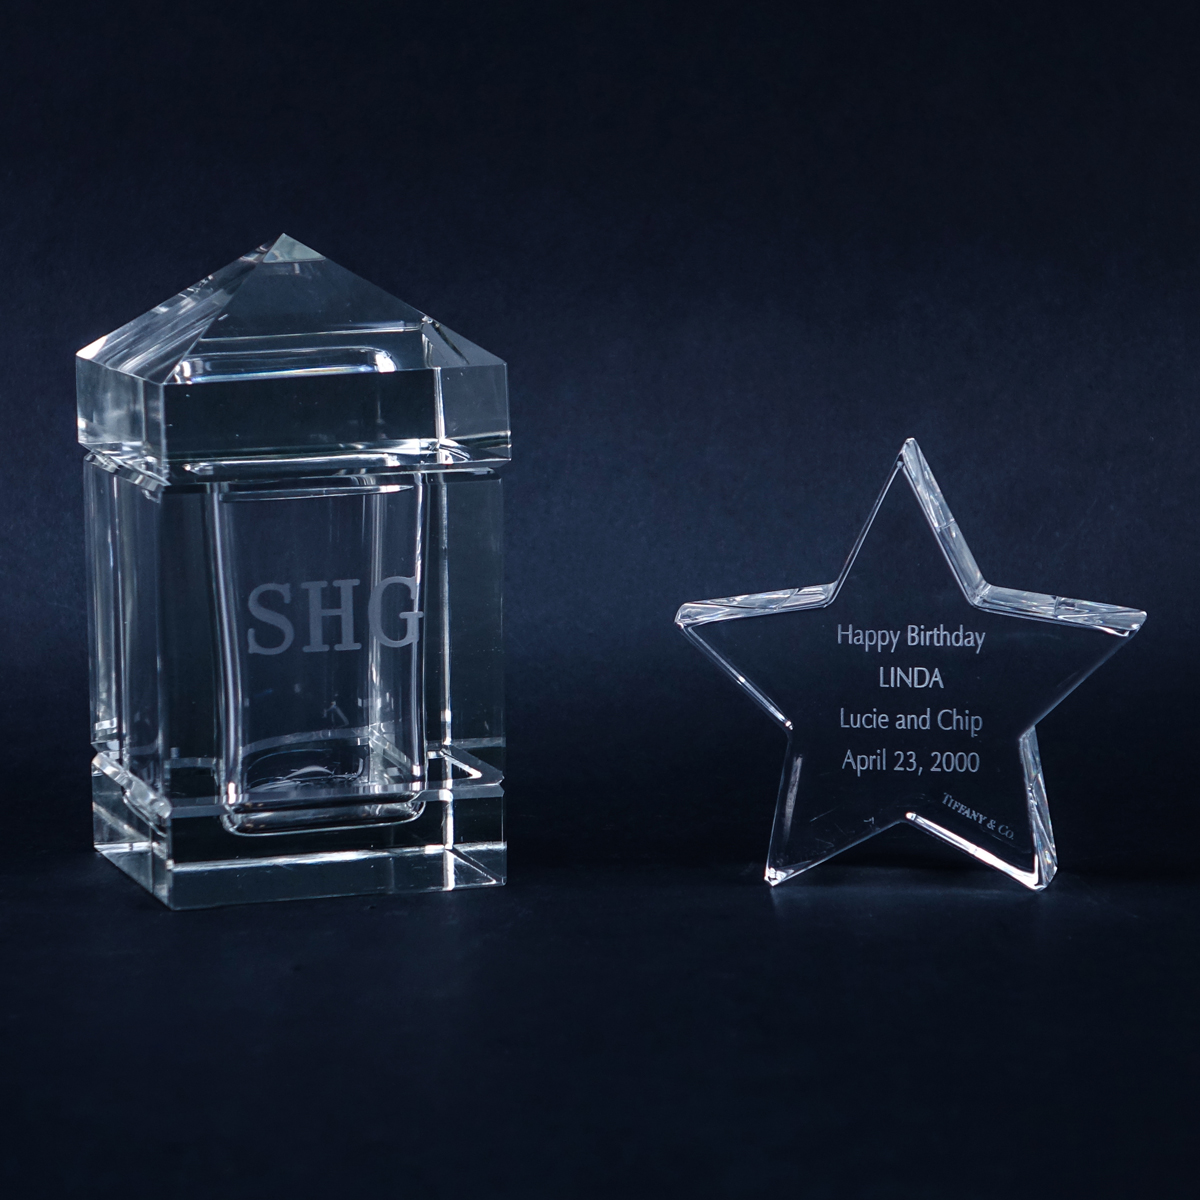 Two (2) Designer Crystal Keepsakes. Includes a Tiffany Star with etched inscription 4-1/4" H and a Cartier "Obelisk" Box Monogramed SHG 6-1/2" H.